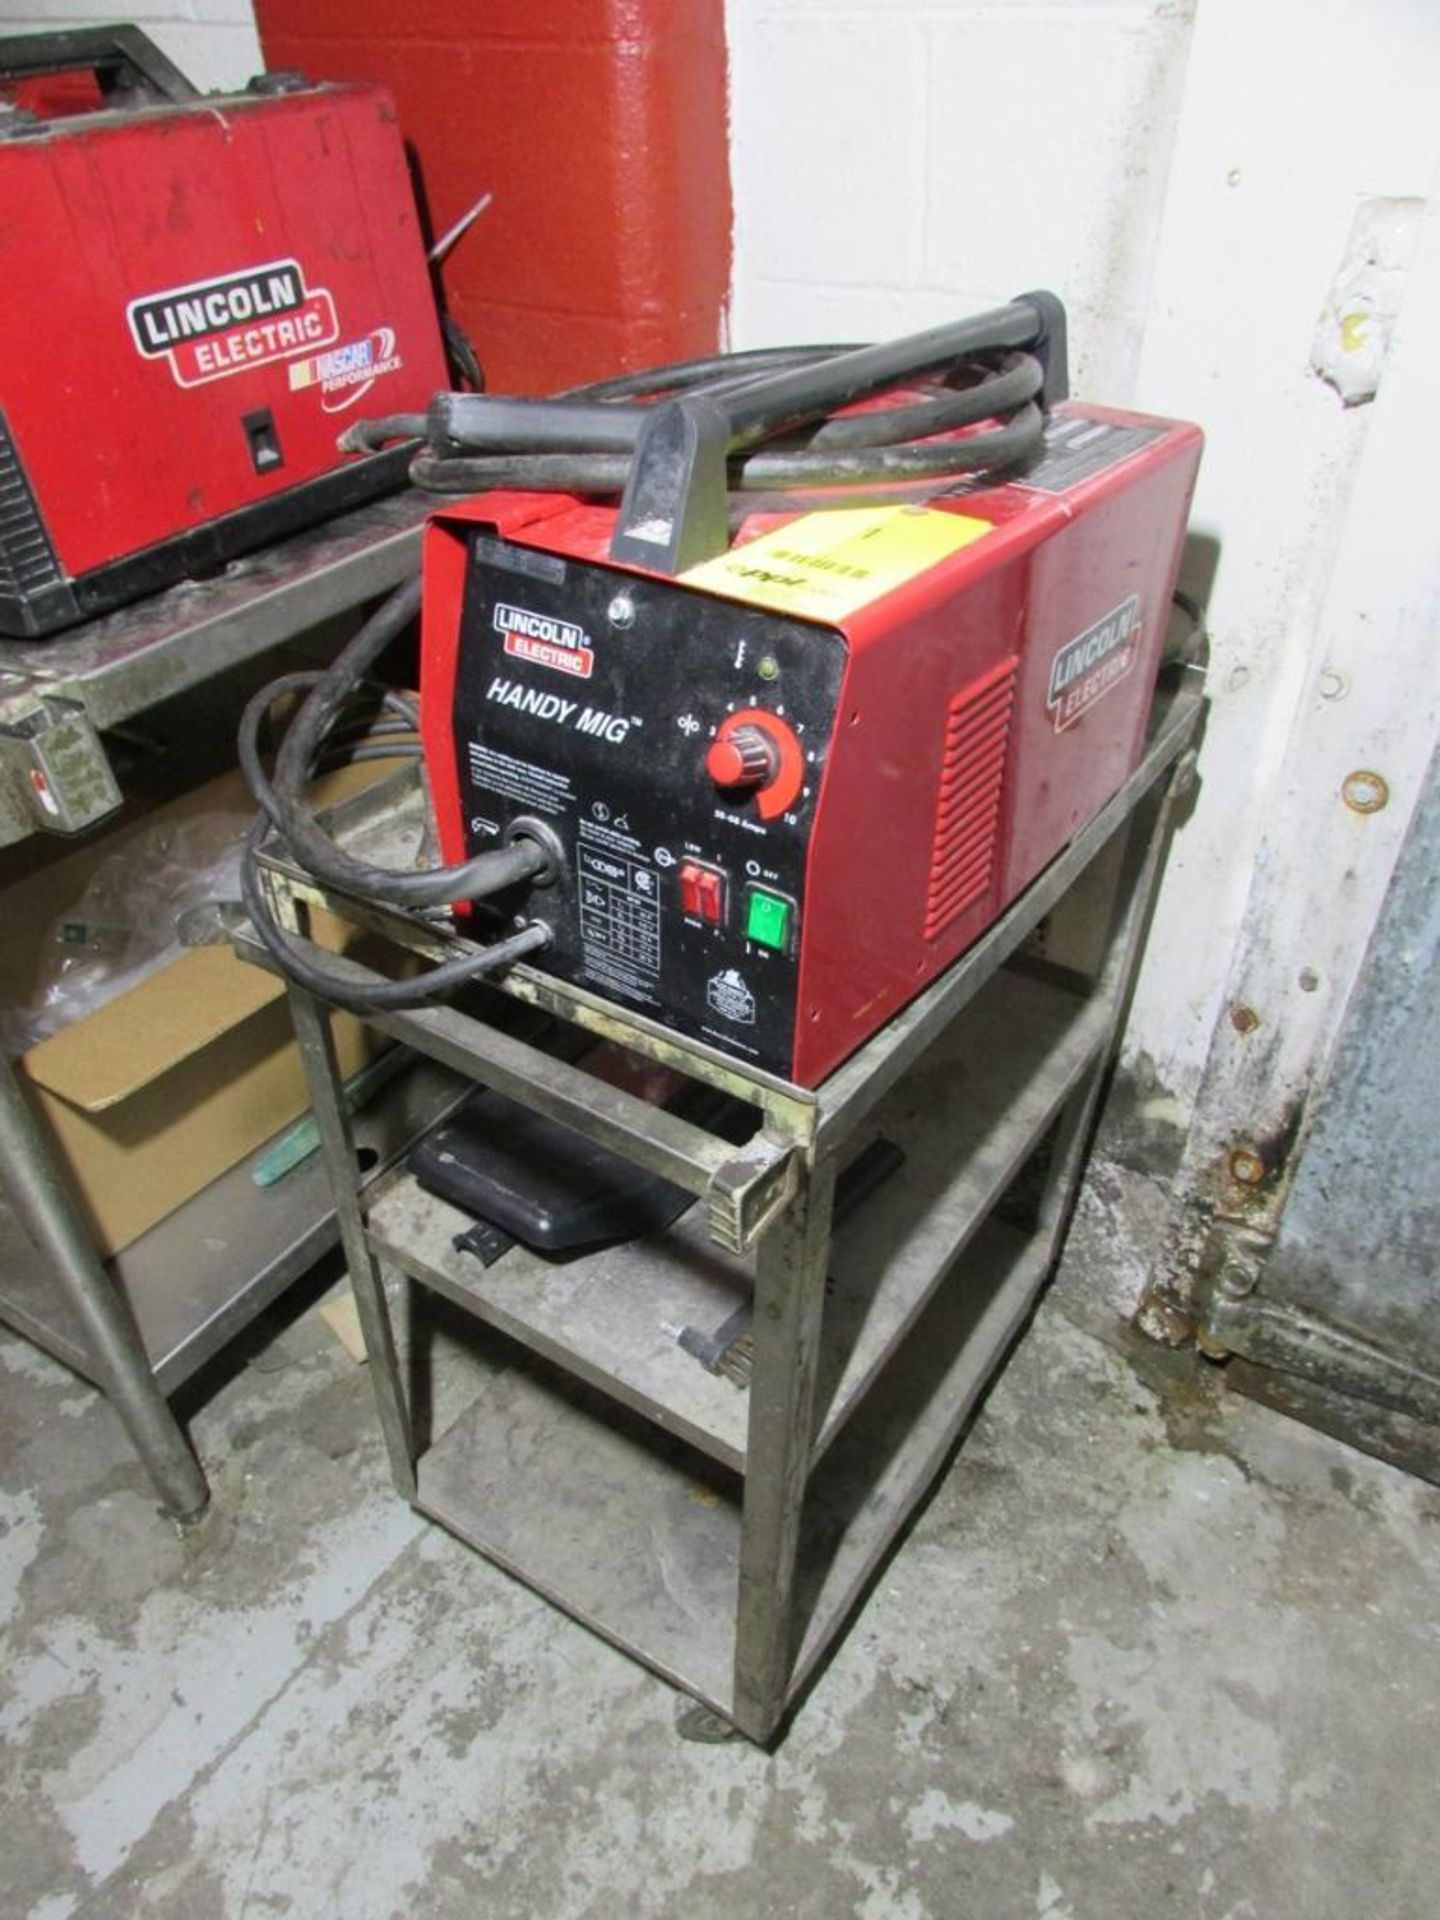 Lincoln Electric Handy MIG Wire Welder. 35-88A, 70A 17V 20% Duty Cycle Output, 115V 20A 60Hz 1PH Inp